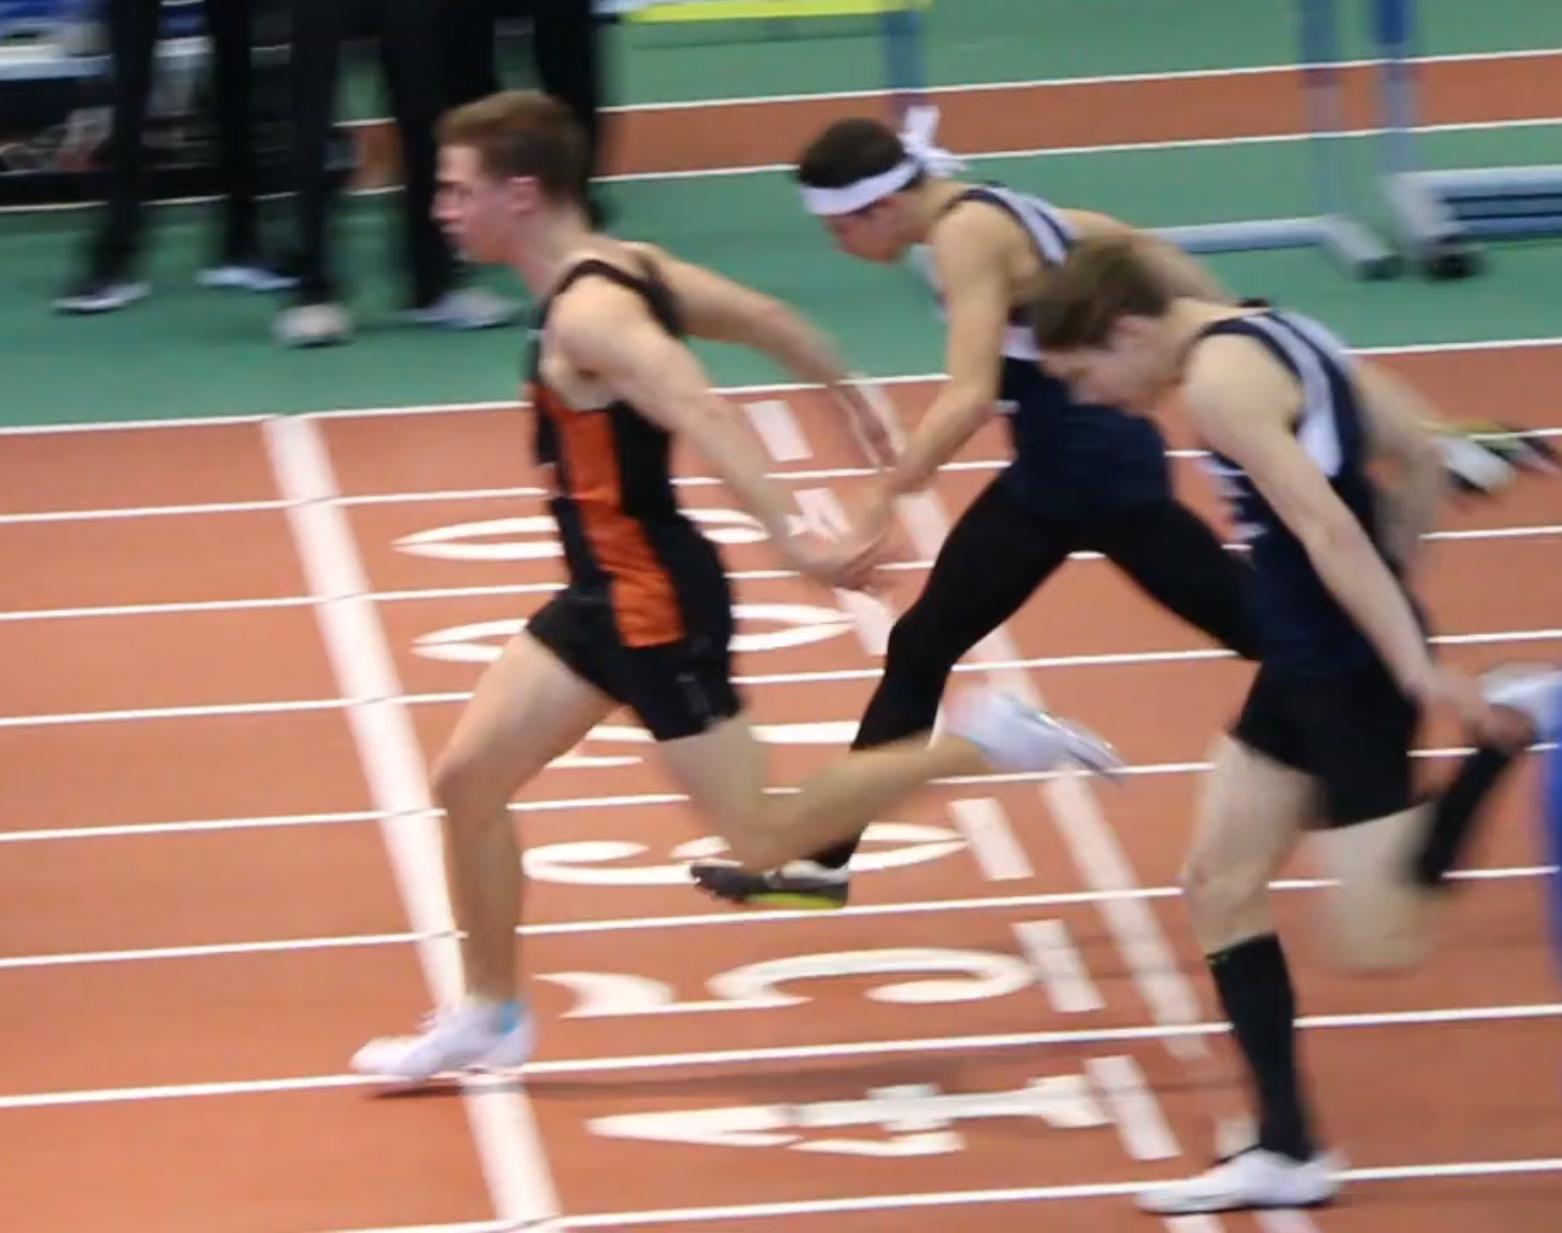 Jackson Thorne (left) blazes across finish line to clinch the league championship in 55-meter dash at the Armory Track & Field Center in New York City.